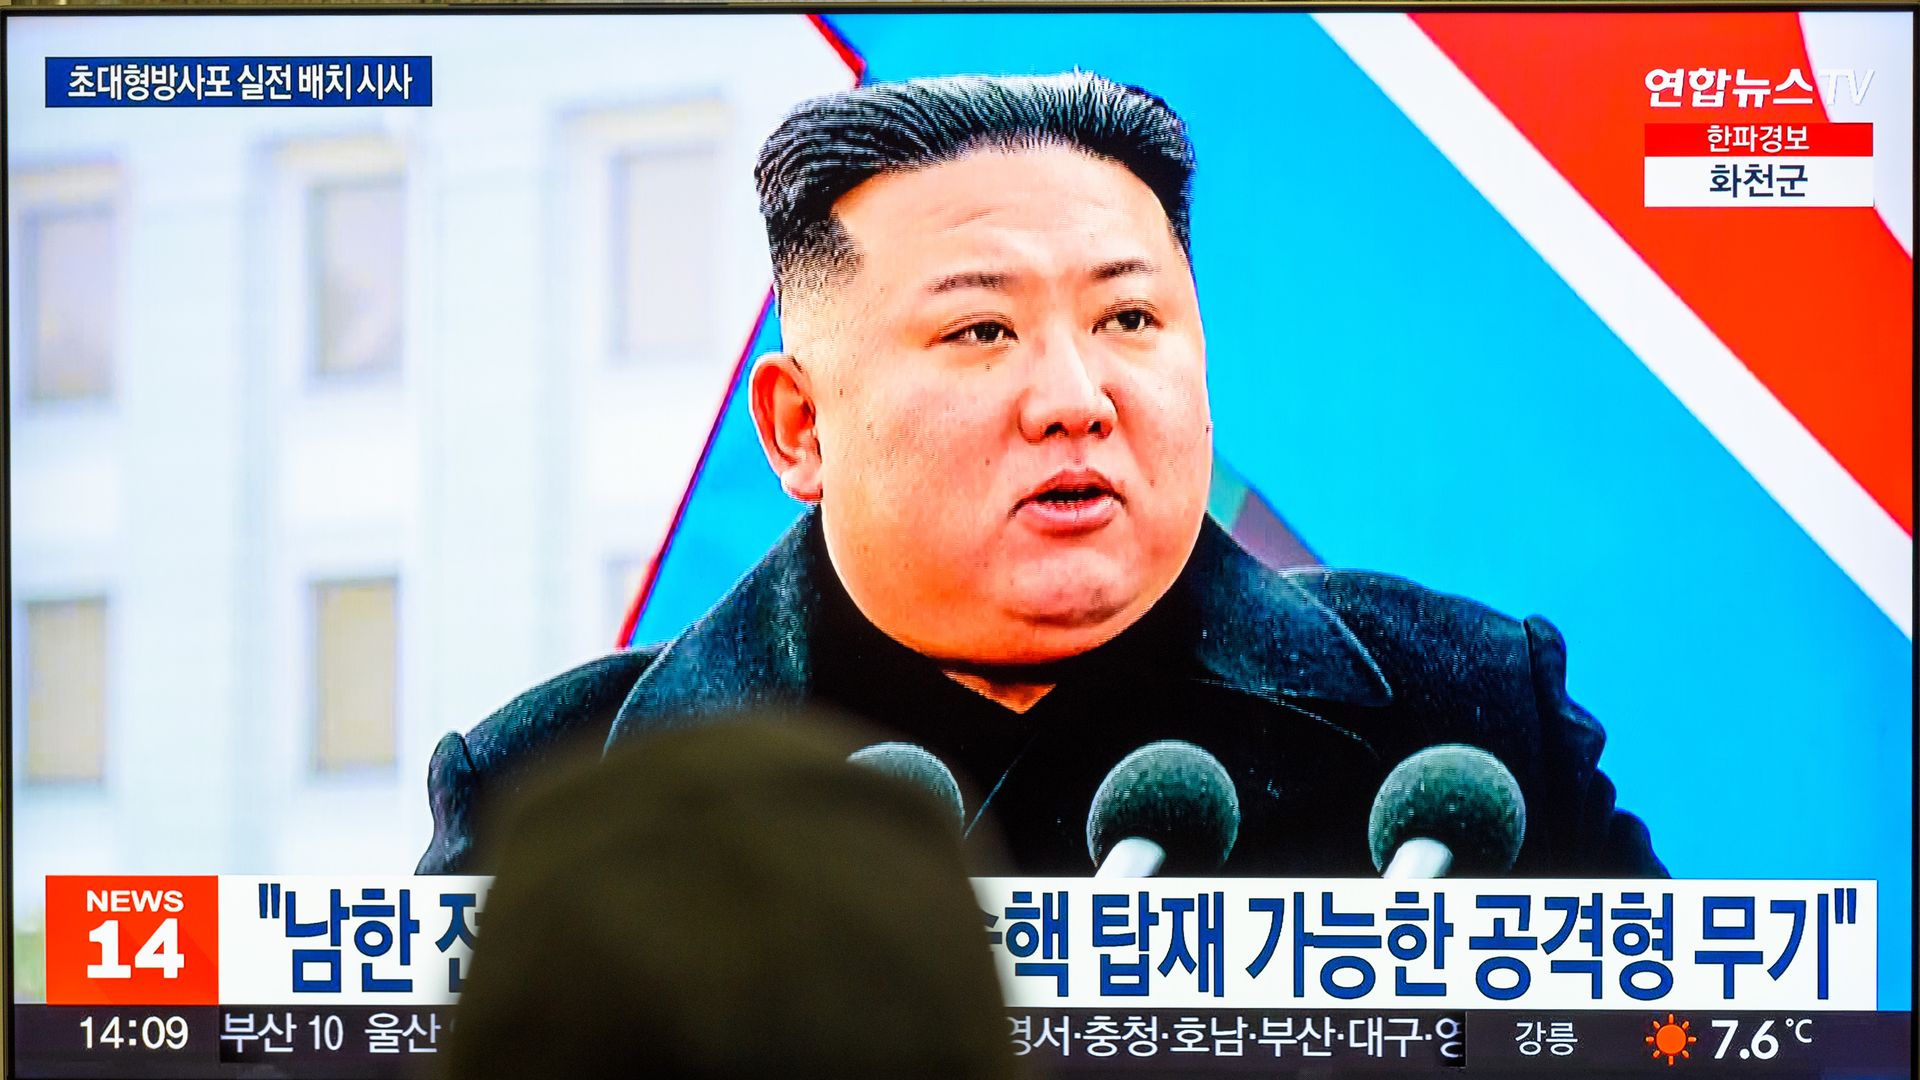  TV screen shows footage of North Korean leader Kim Jong-un during a news program at the Yongsan Railway Station in Seoul. 